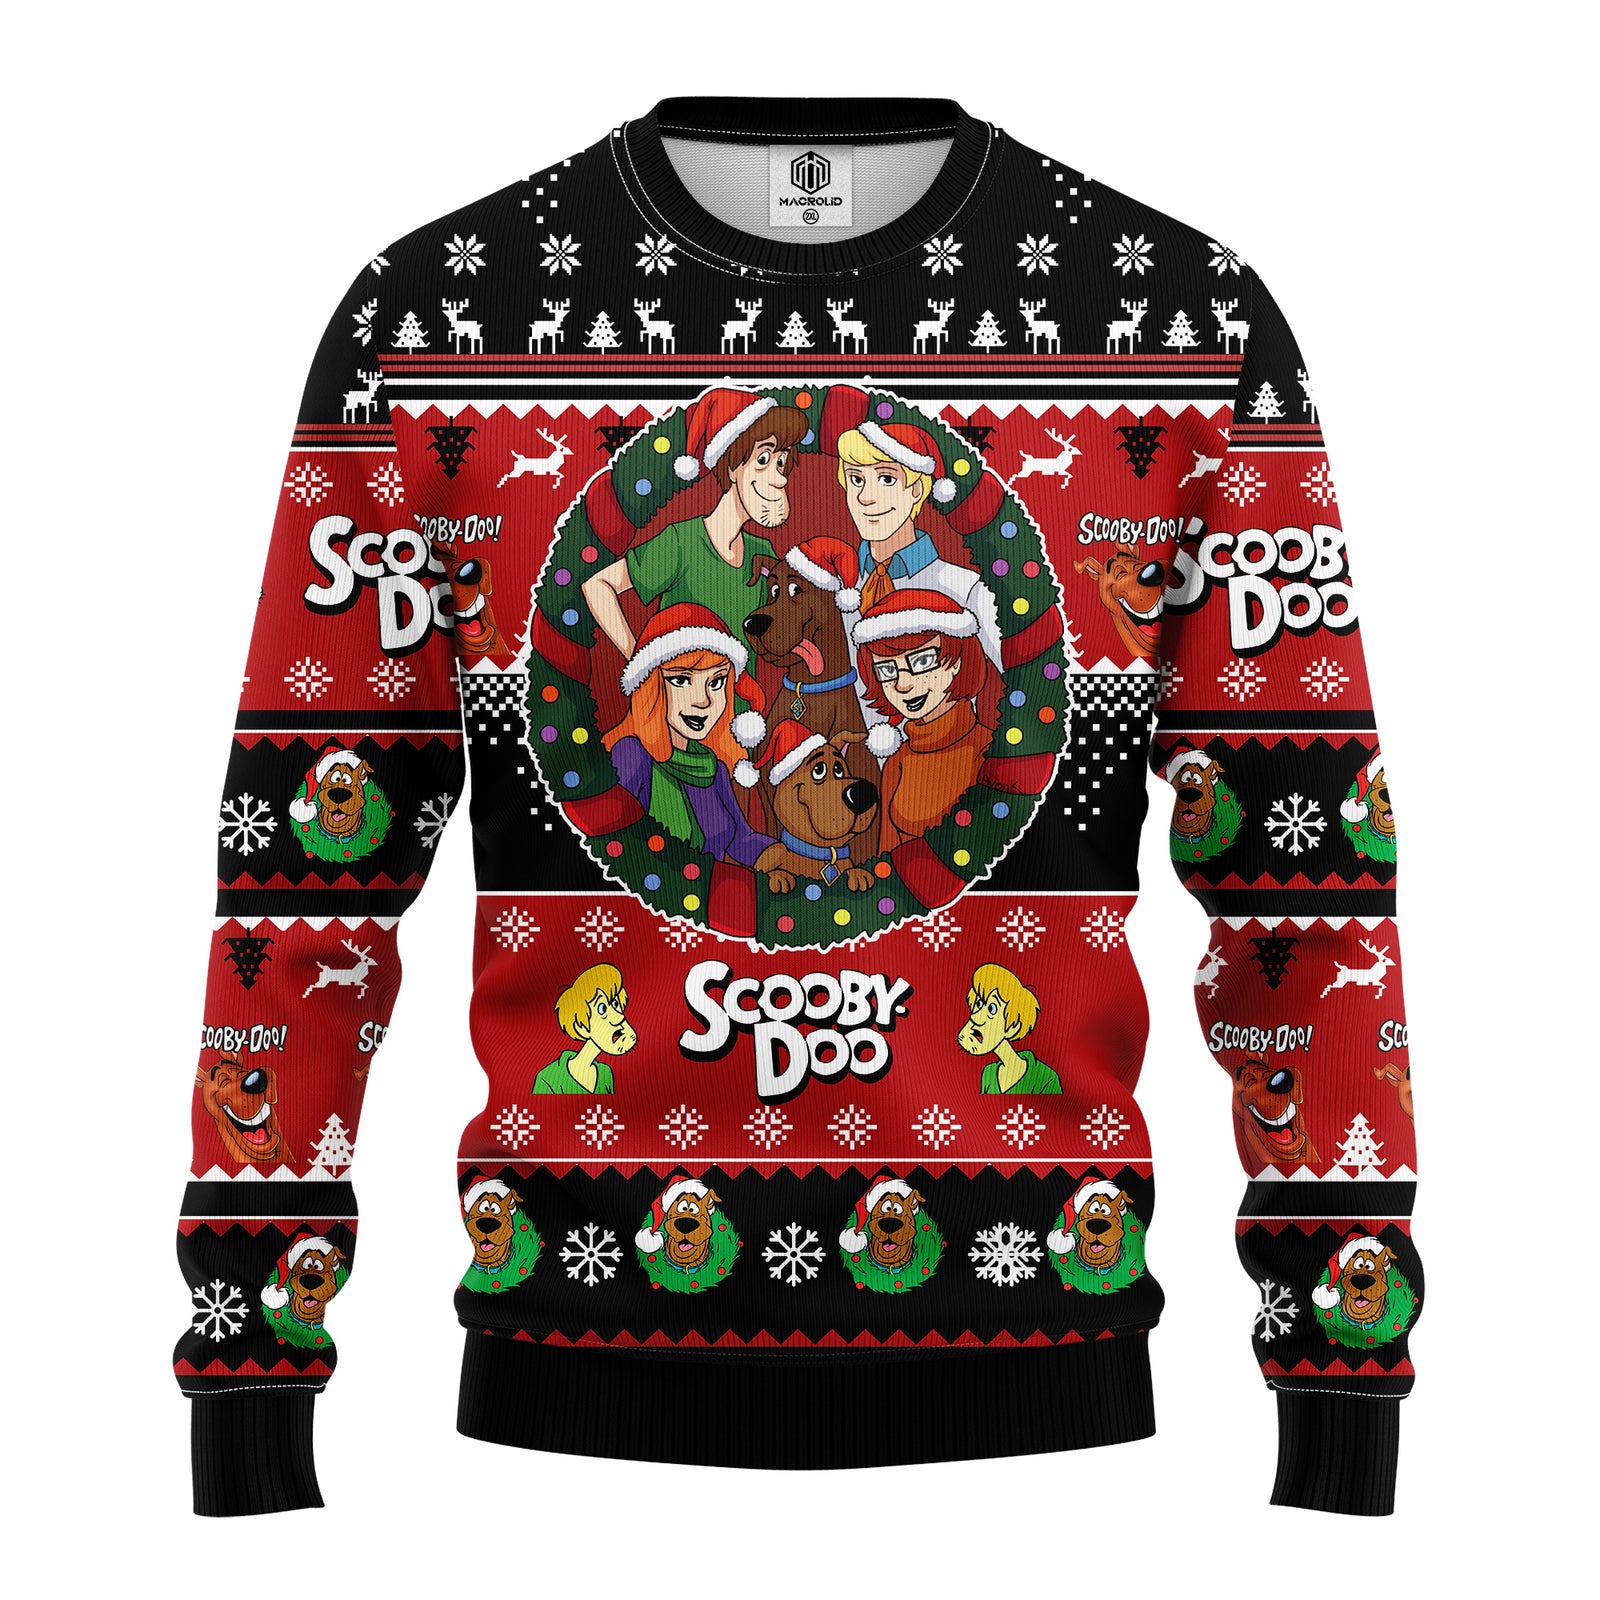 Scooby doo 3d ugly christmas sweater - Amazing Gift idea - thanksgivin